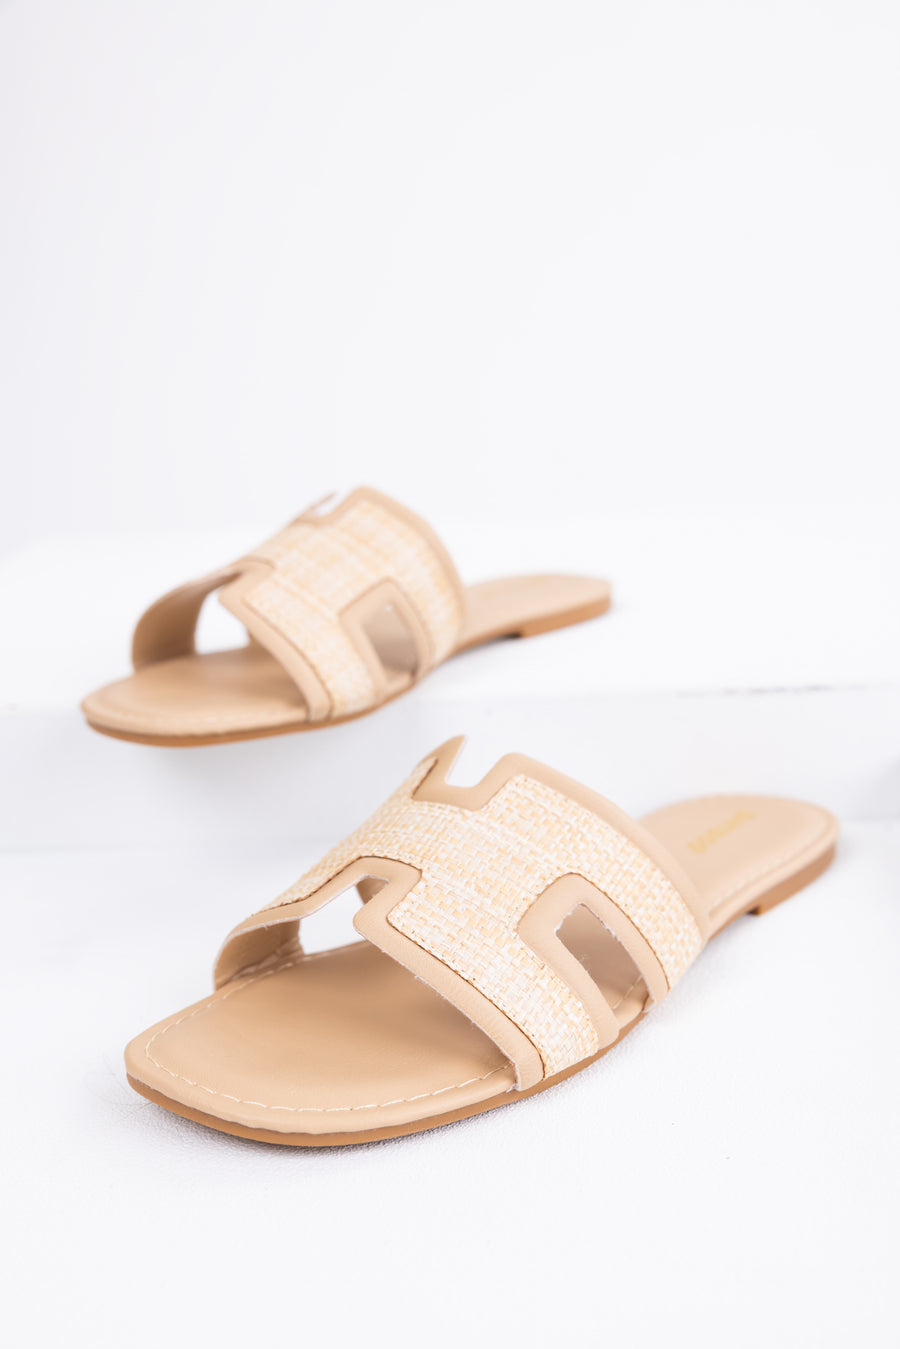 Nude Cut Out Woven Strap Open Toe Flat Sandals